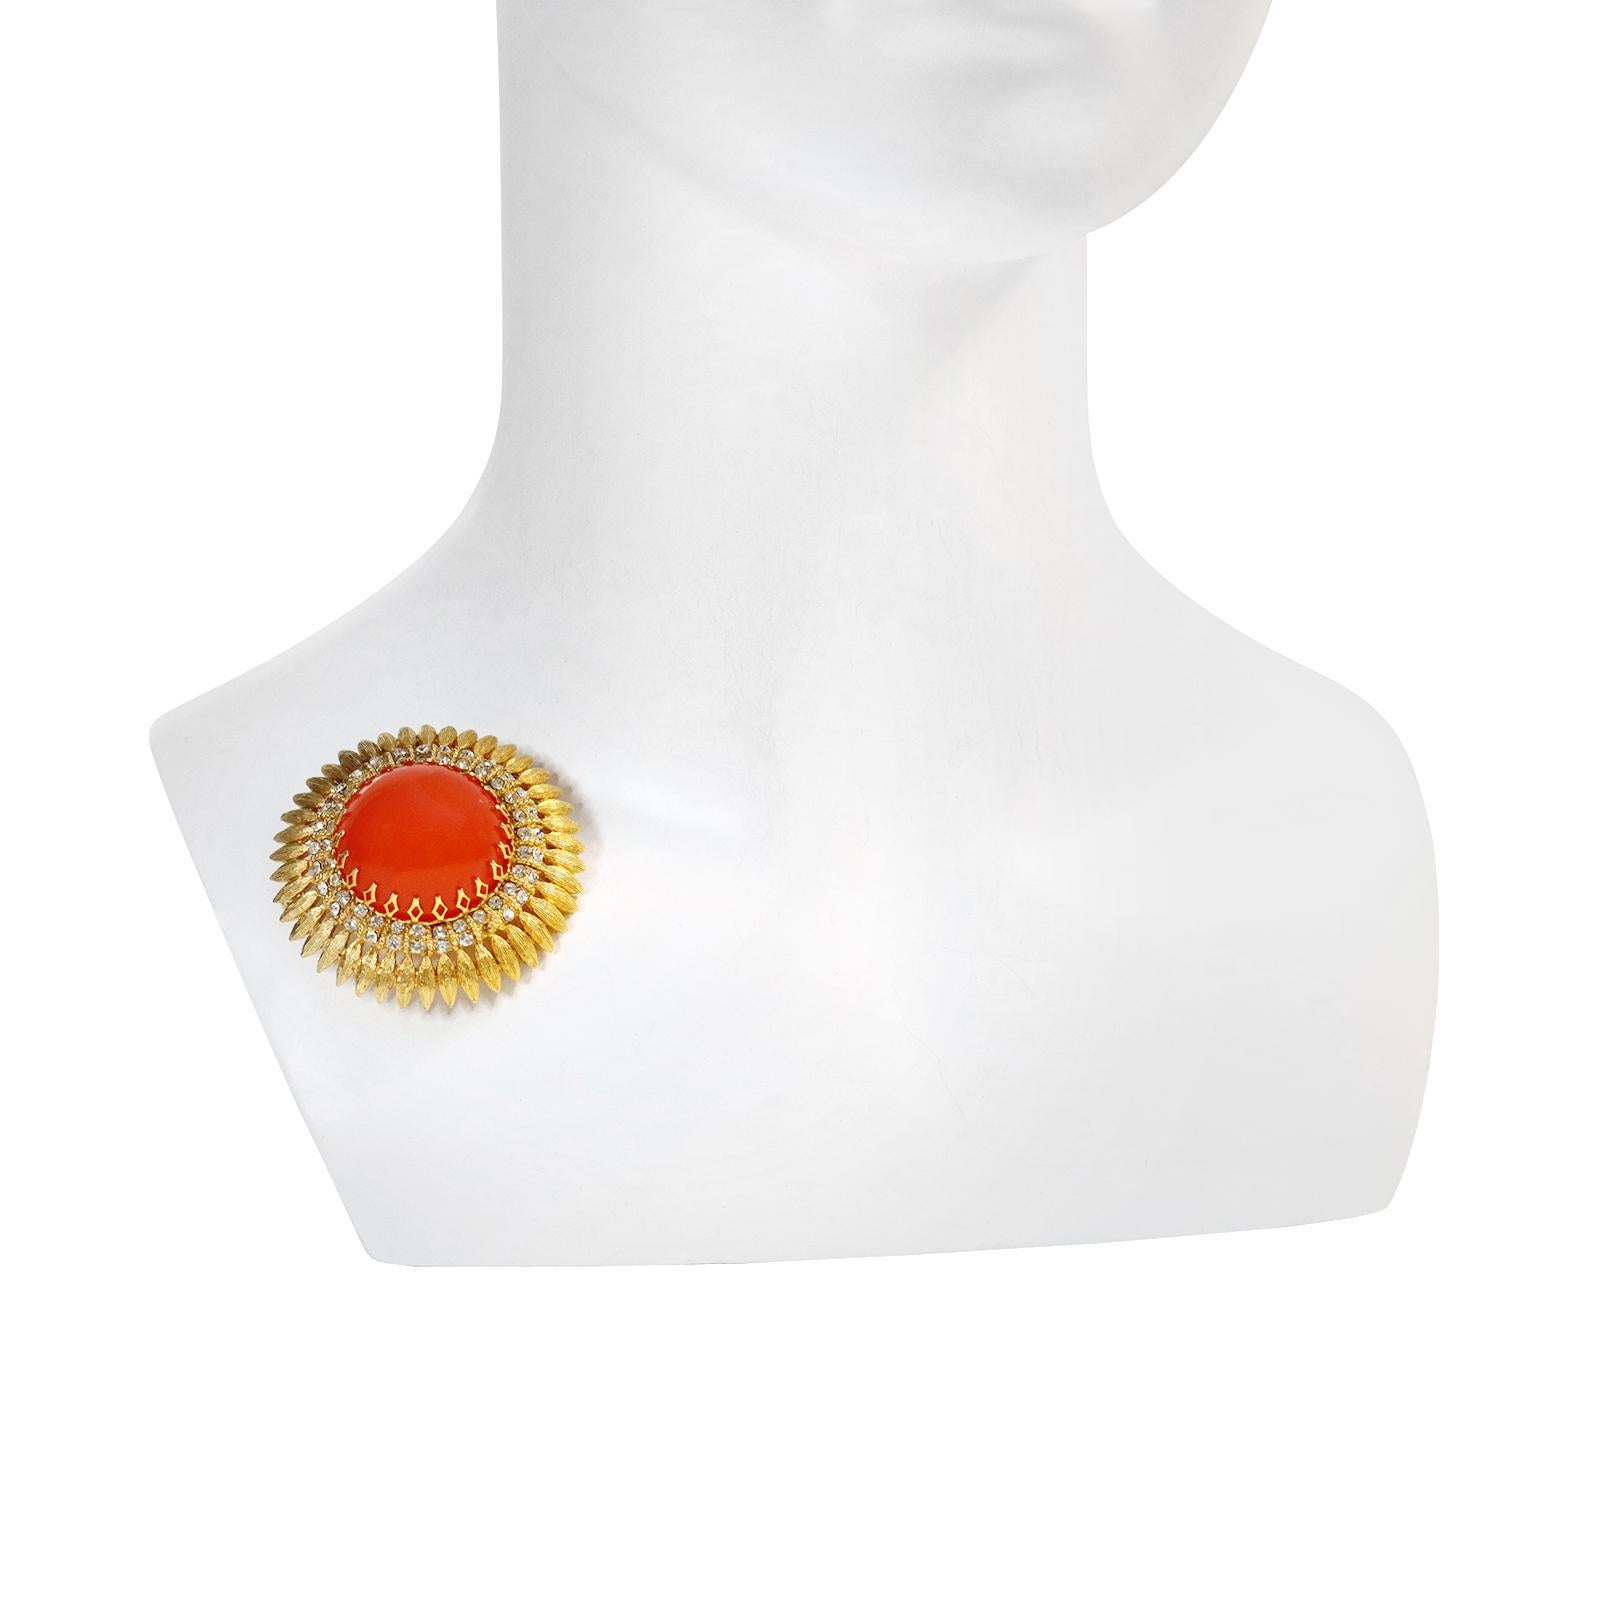 Vintage Domed Faux Coral with Diamante Brooch.  The Brooch is elevated in 3 layers.  Such a chic brooch. The gold against the diamante and the faux coral look great.